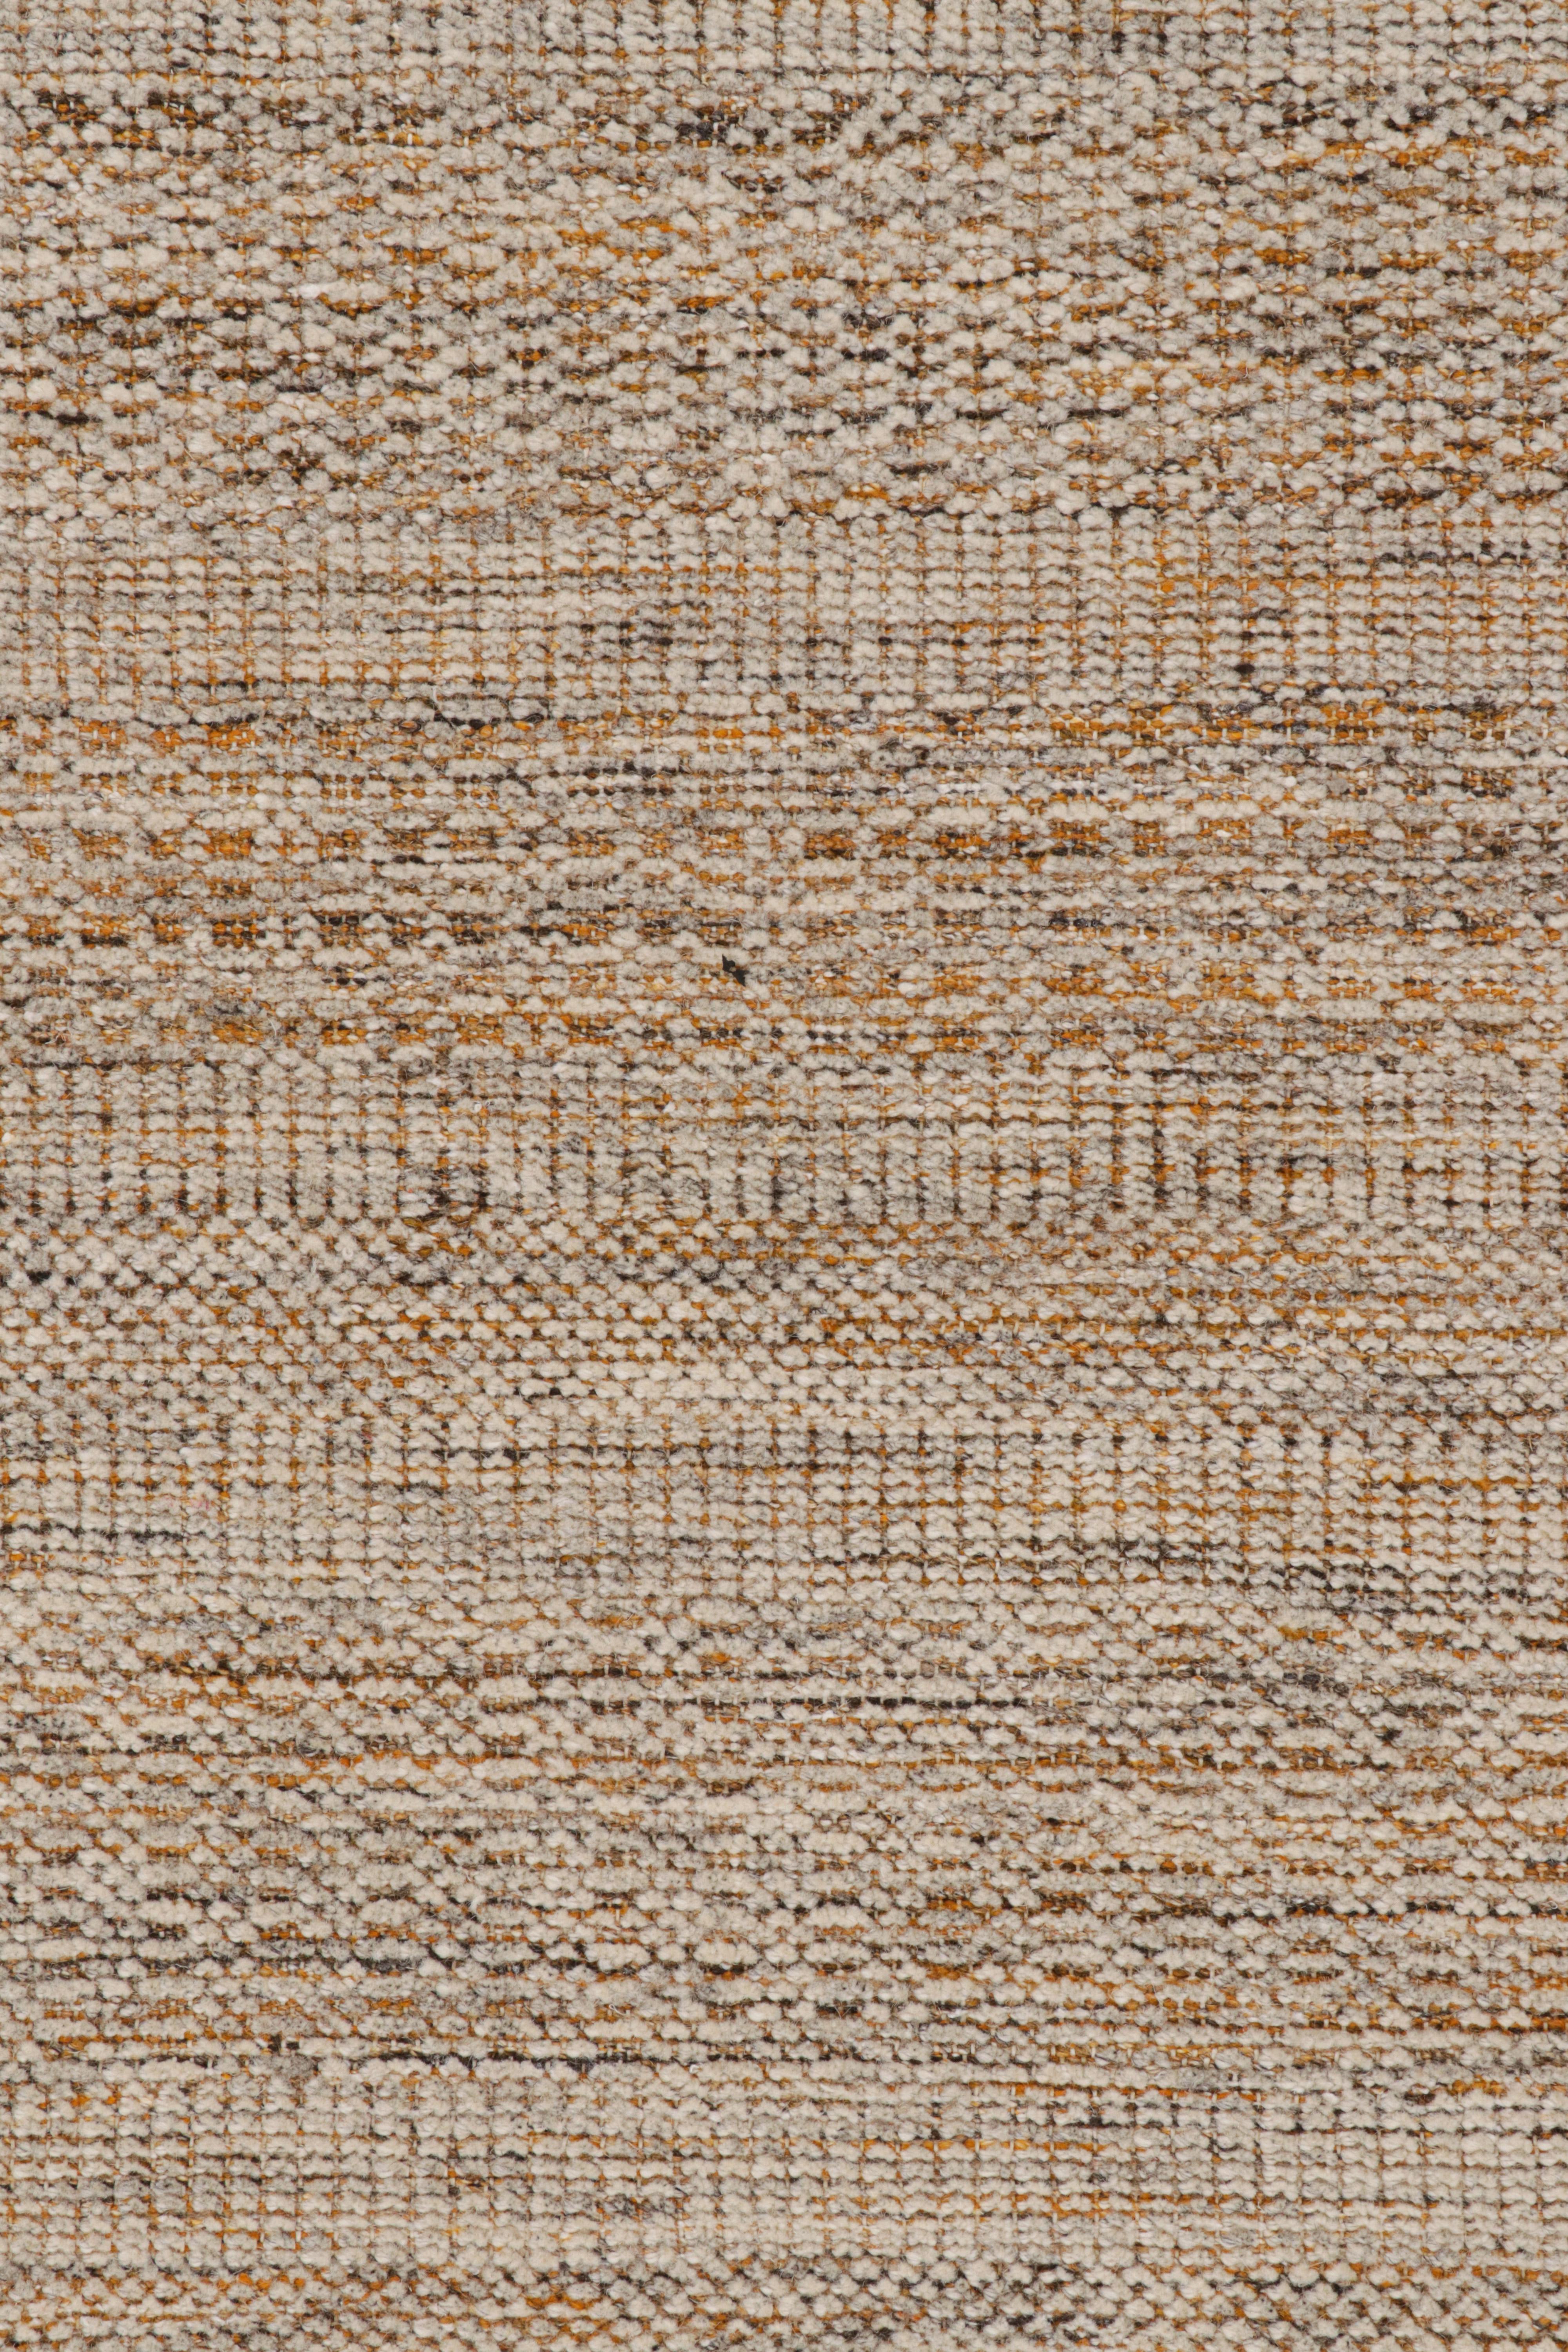 Rug & Kilim’s Contemporary Textural Kilim in Beige-brown Orange and White Tones For Sale